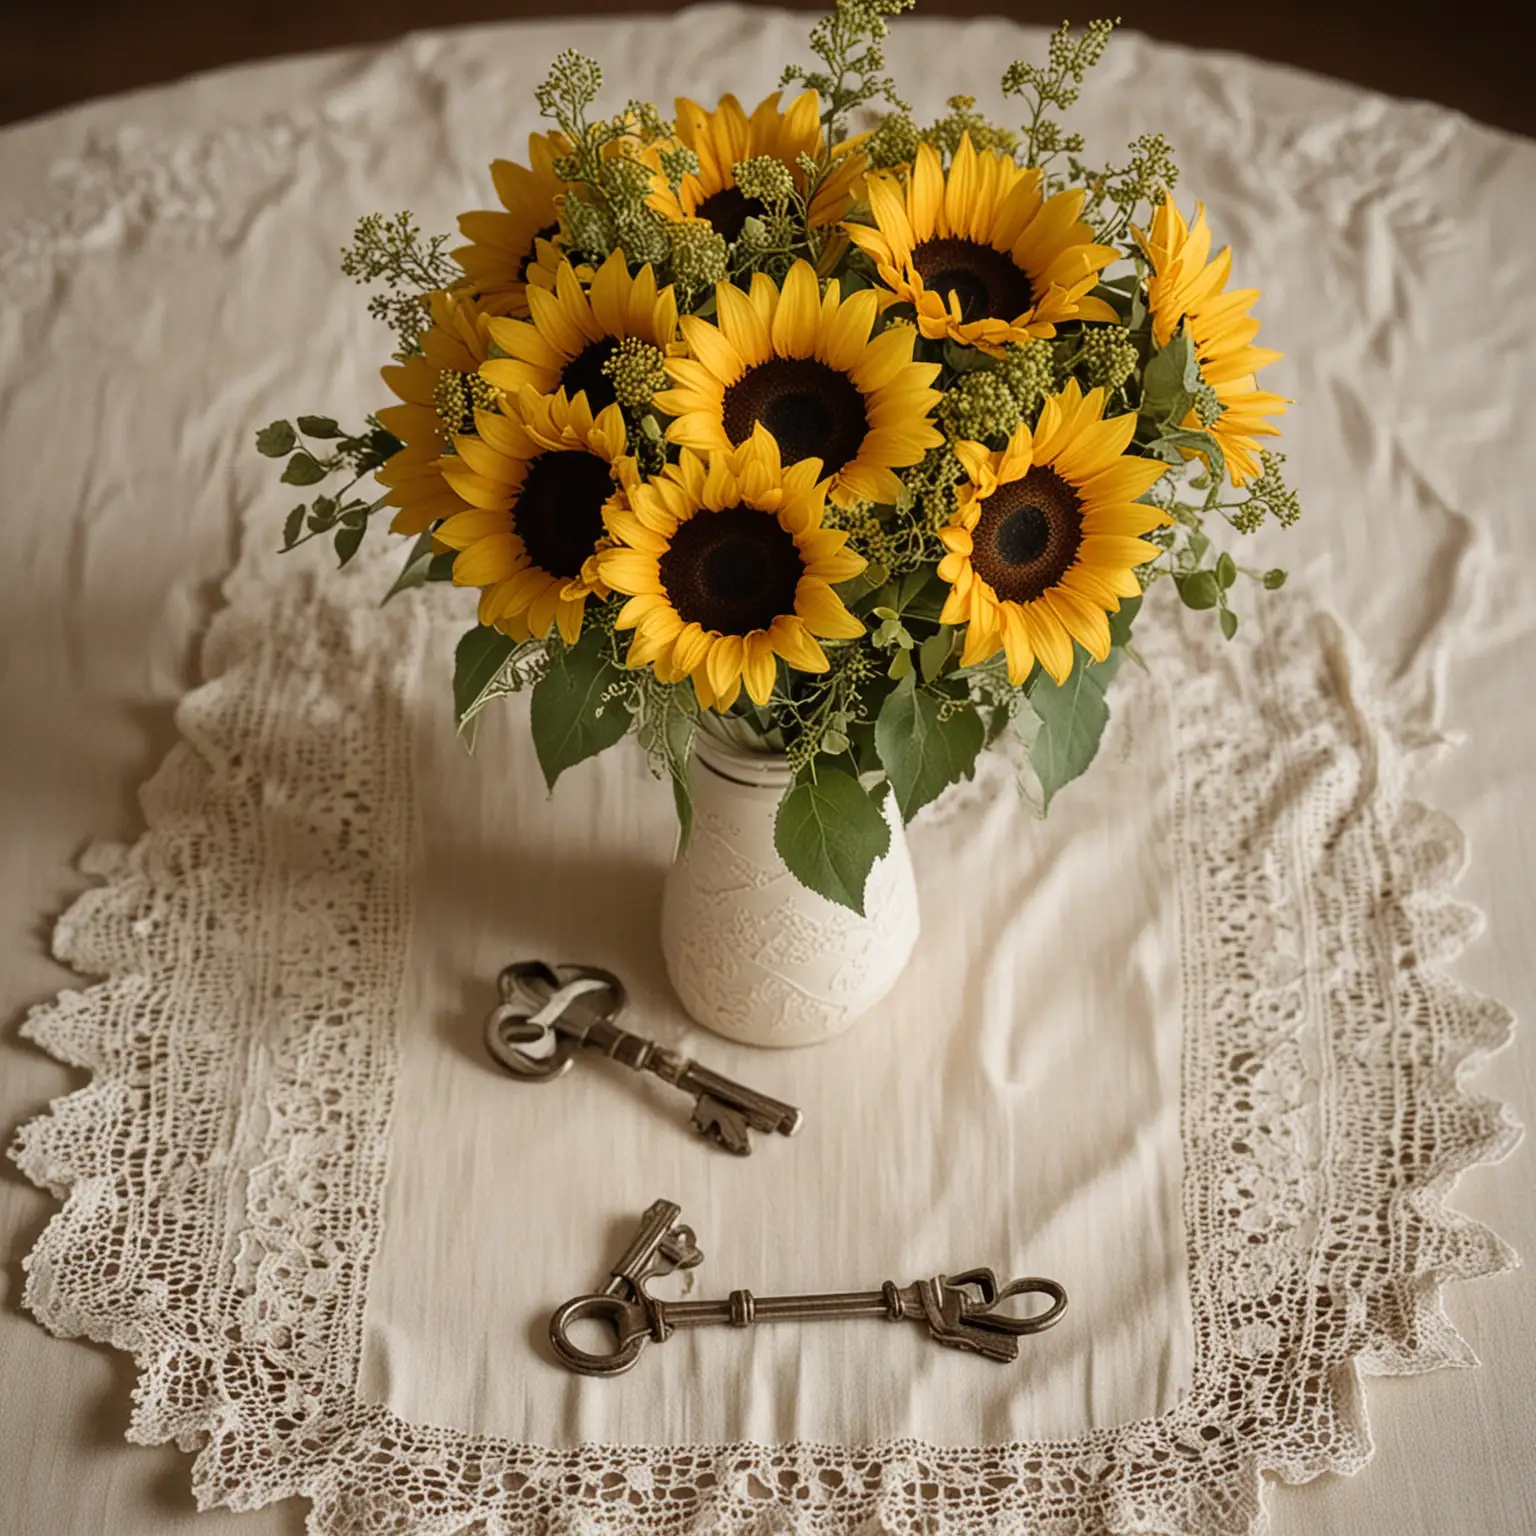 Vintage-Sunflower-Bouquet-with-Antique-Ivory-Vase-and-Keys-on-Lace-Placemat